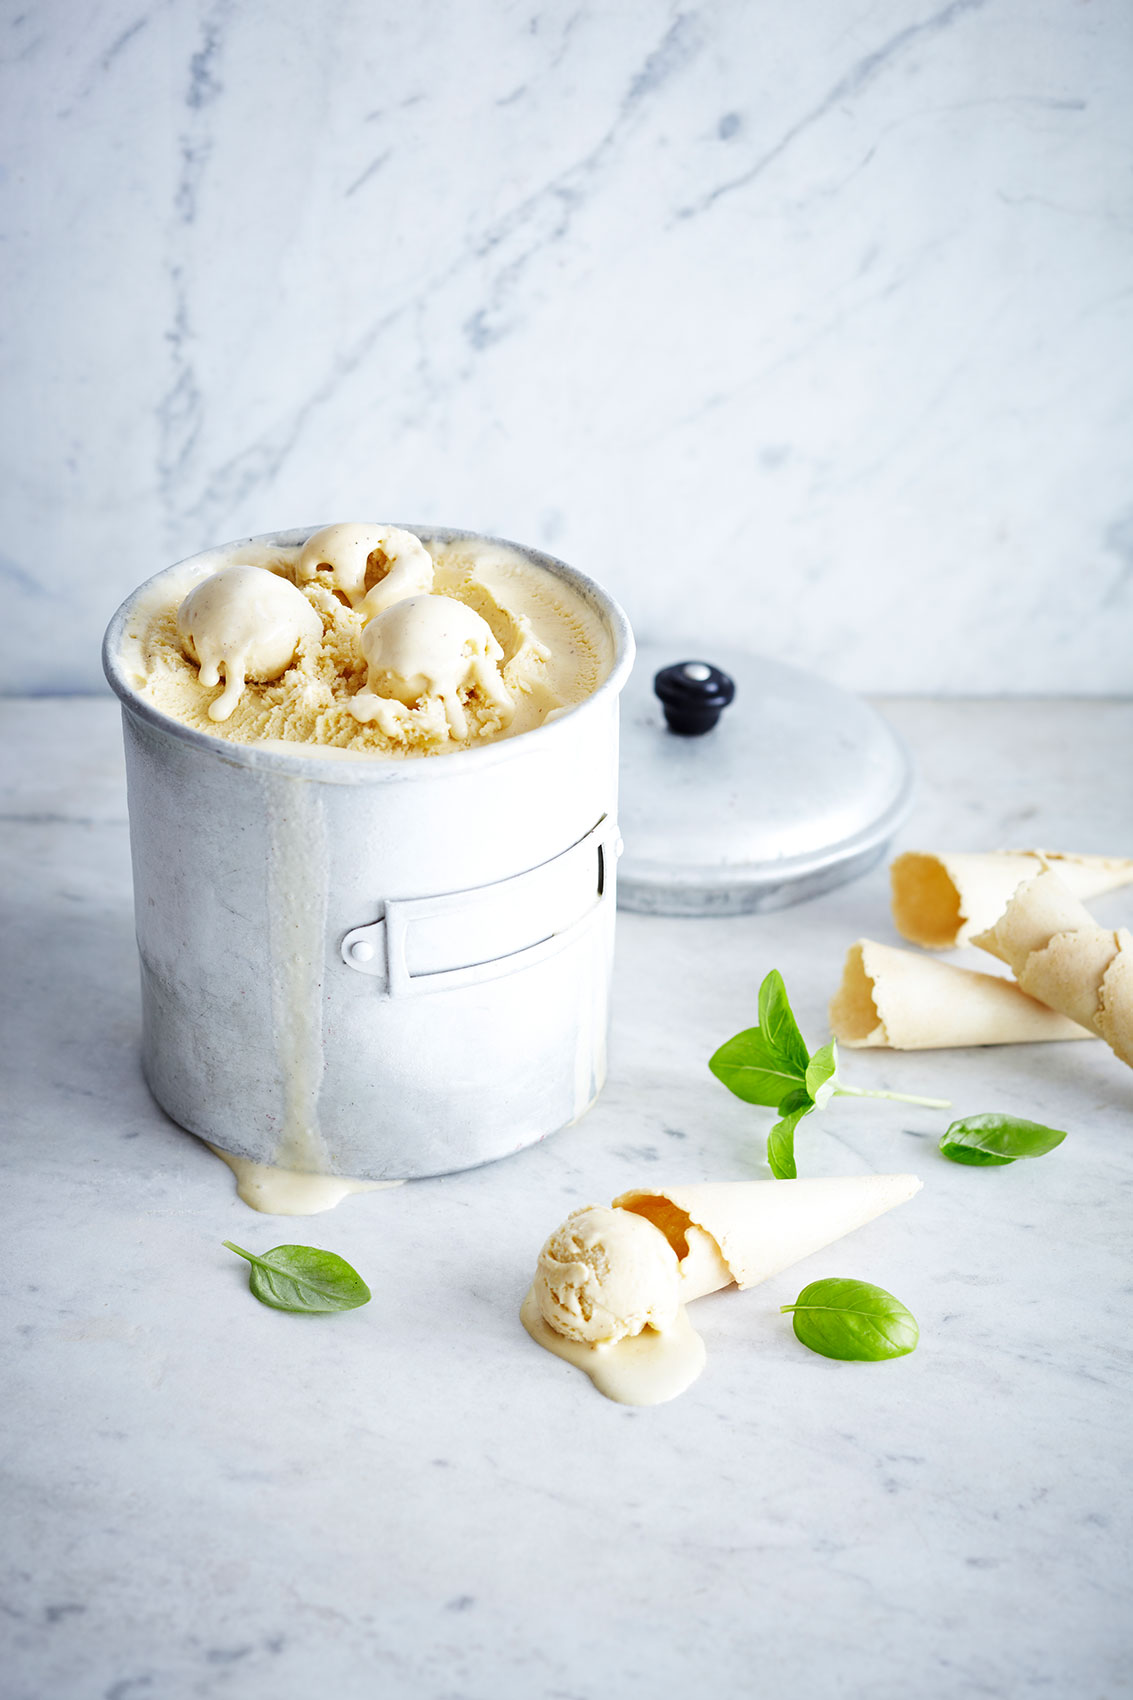 Spice Health Heroes • Basil Ice Cream Cones Scooped from Metal Tub • Cookbook & Editorial Food Photography